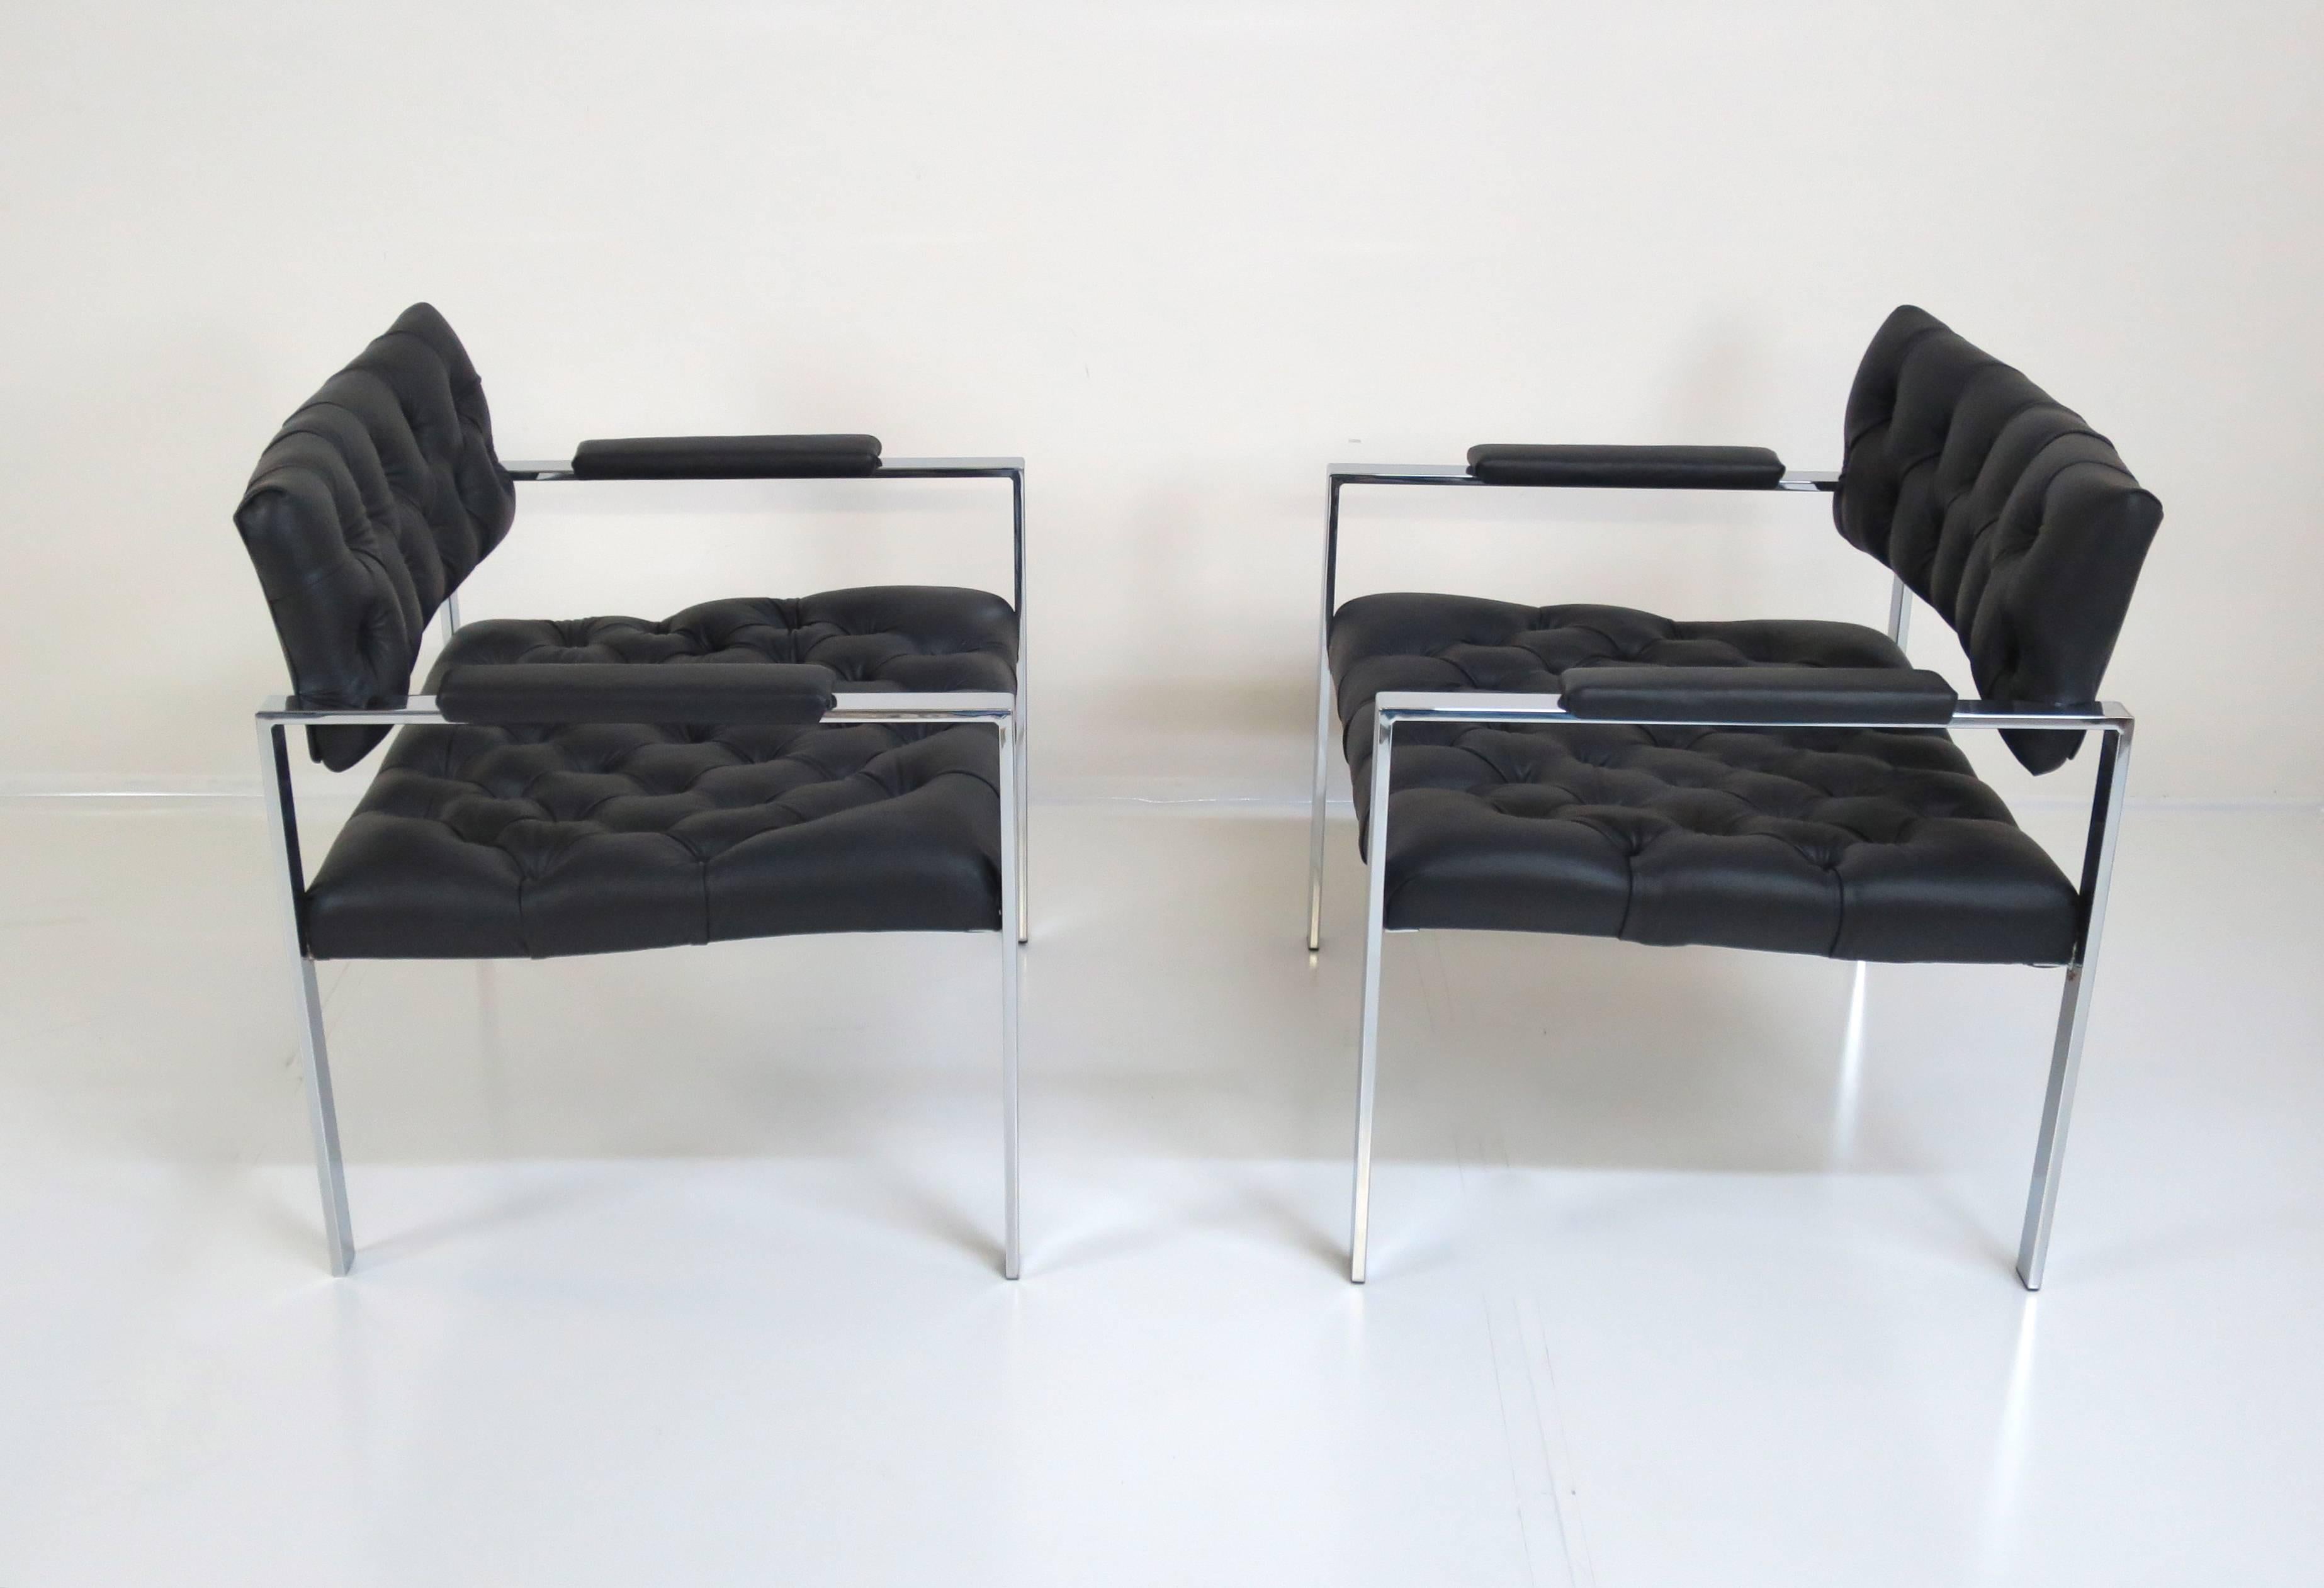 Pair of Leather Tufted Lounge Chairs by Harvey Probber In Good Condition For Sale In San Diego, CA